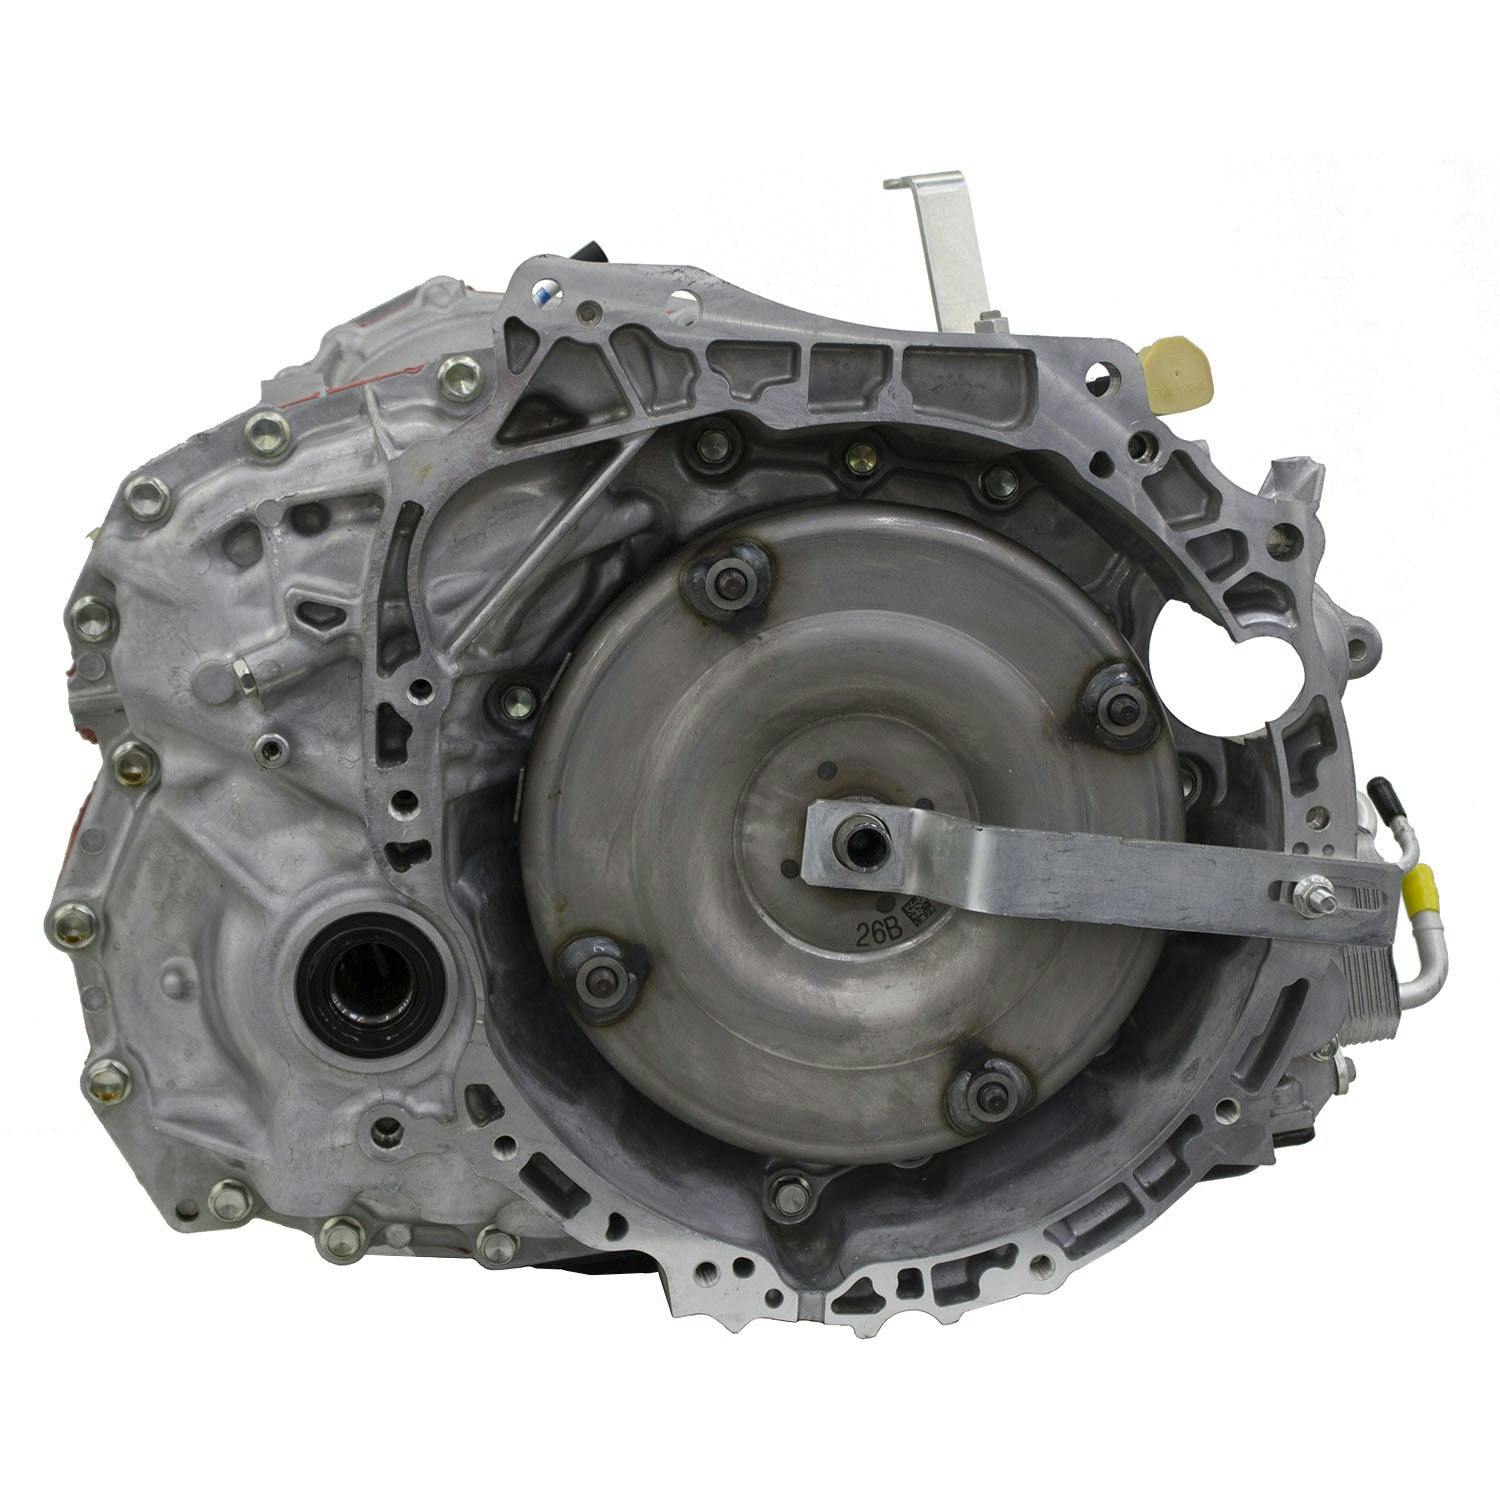 Automatic Transmission for 2010-2013 Nissan Altima FWD with 3.5L V6 Engine